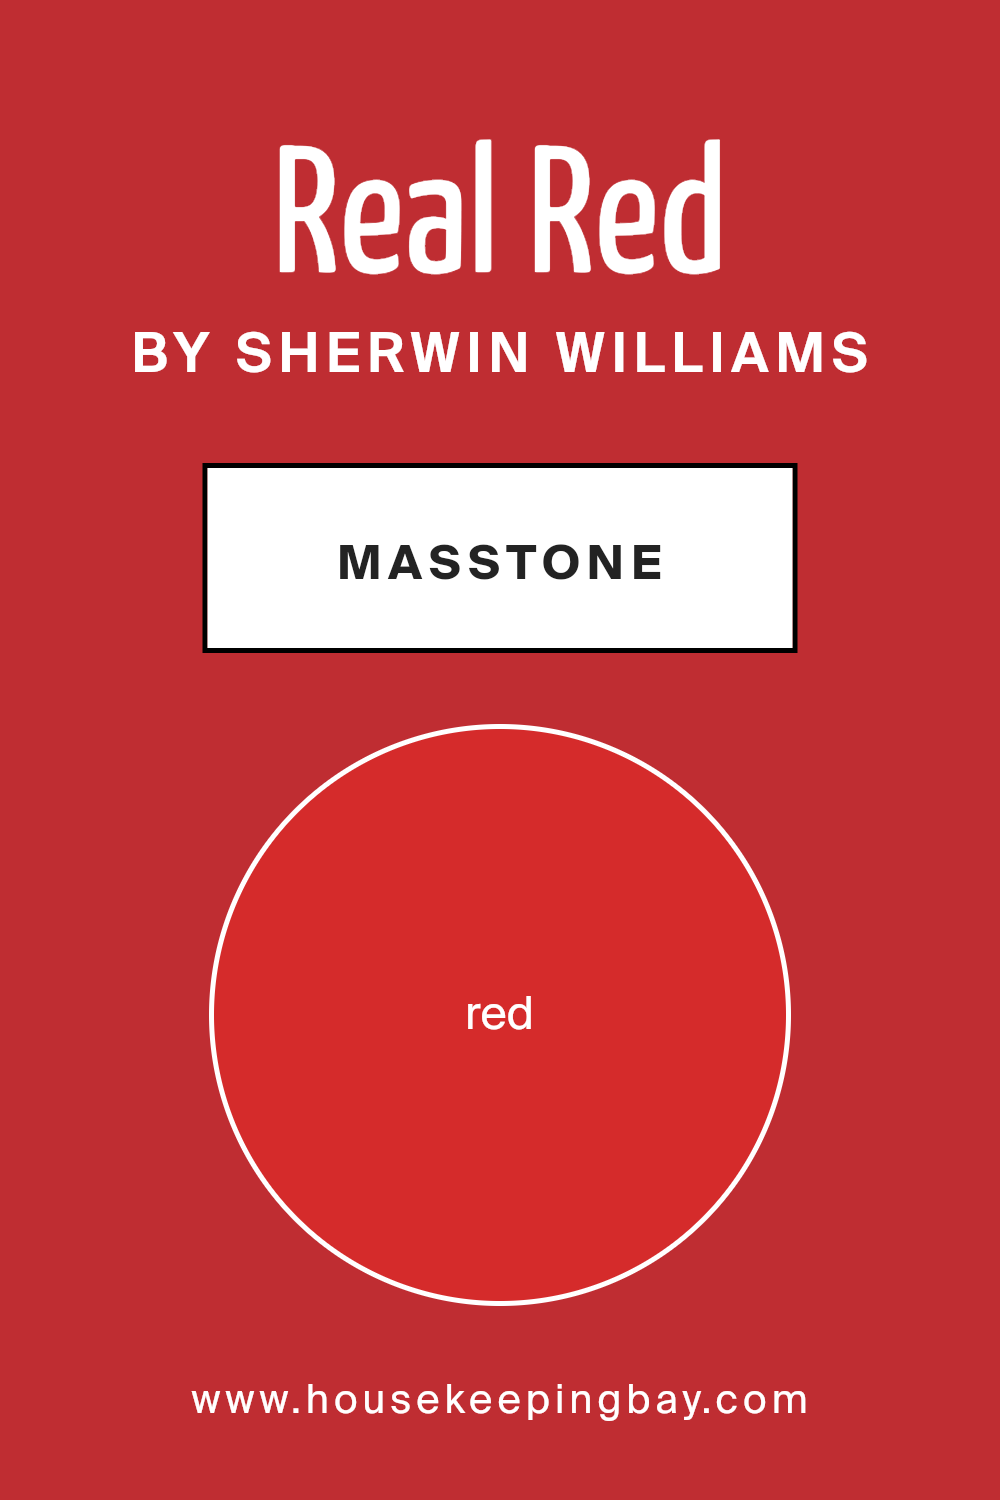 what_is_the_masstone_of_real_red_sw_6868